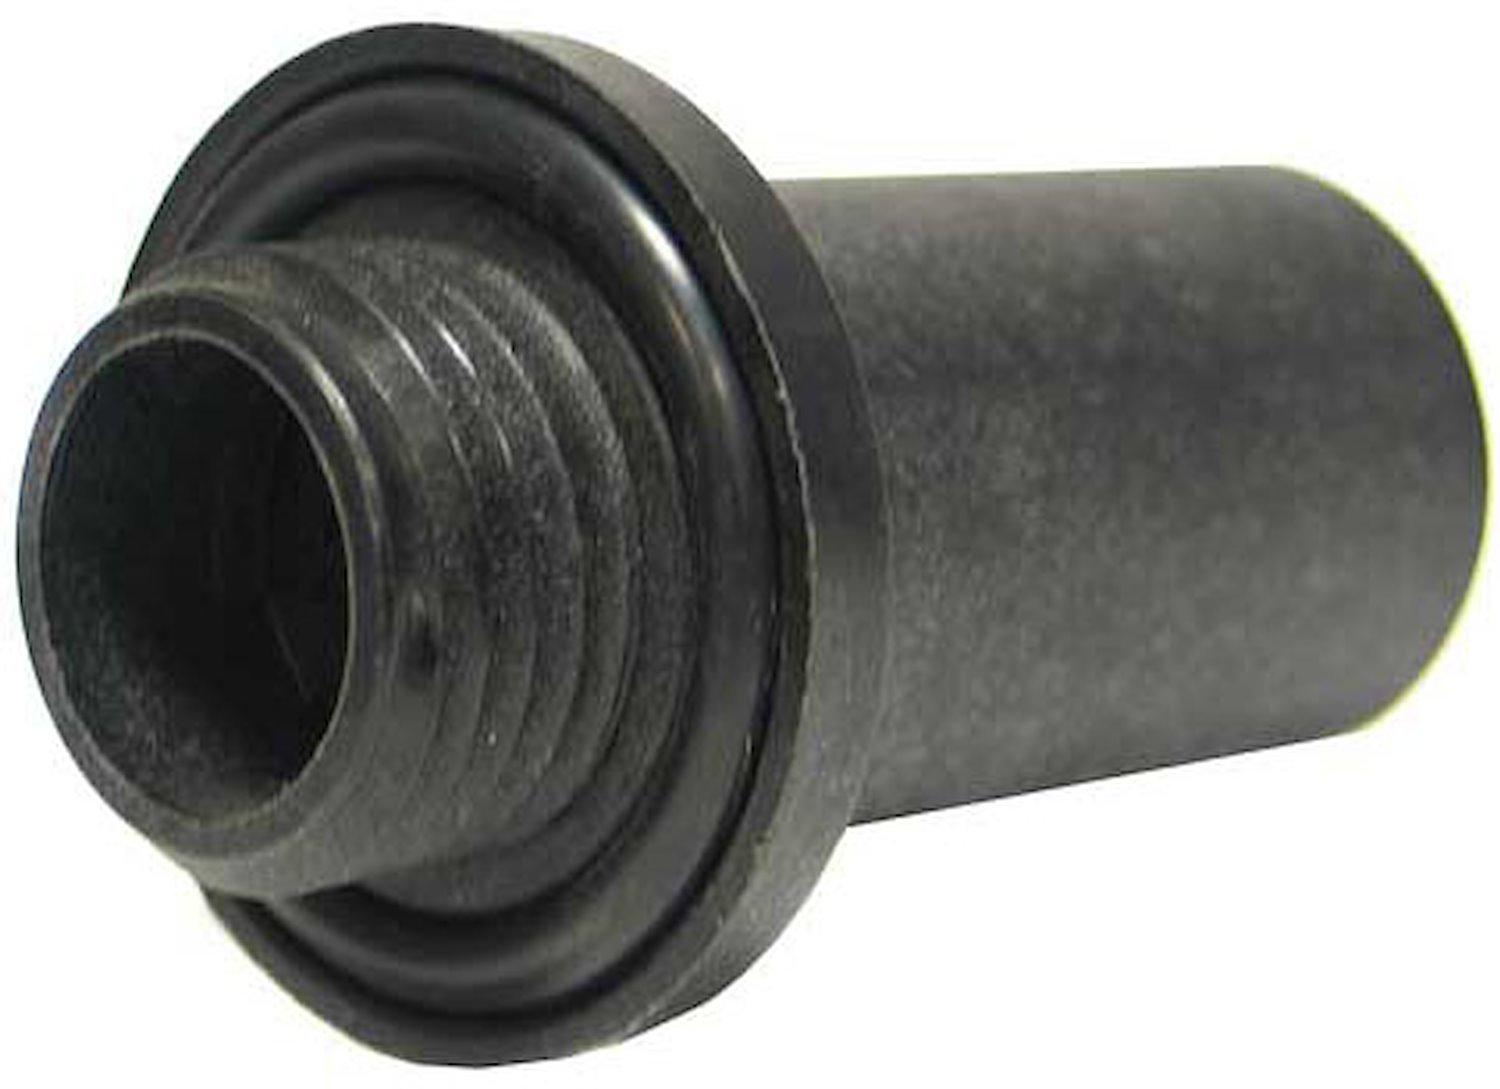 Plastic Vent Adapter Screw-in Style for Late GM  Valve Covers, 3.5" H x 1.5" W x 3.5" L Use with 1-1/2" Flanged Filter